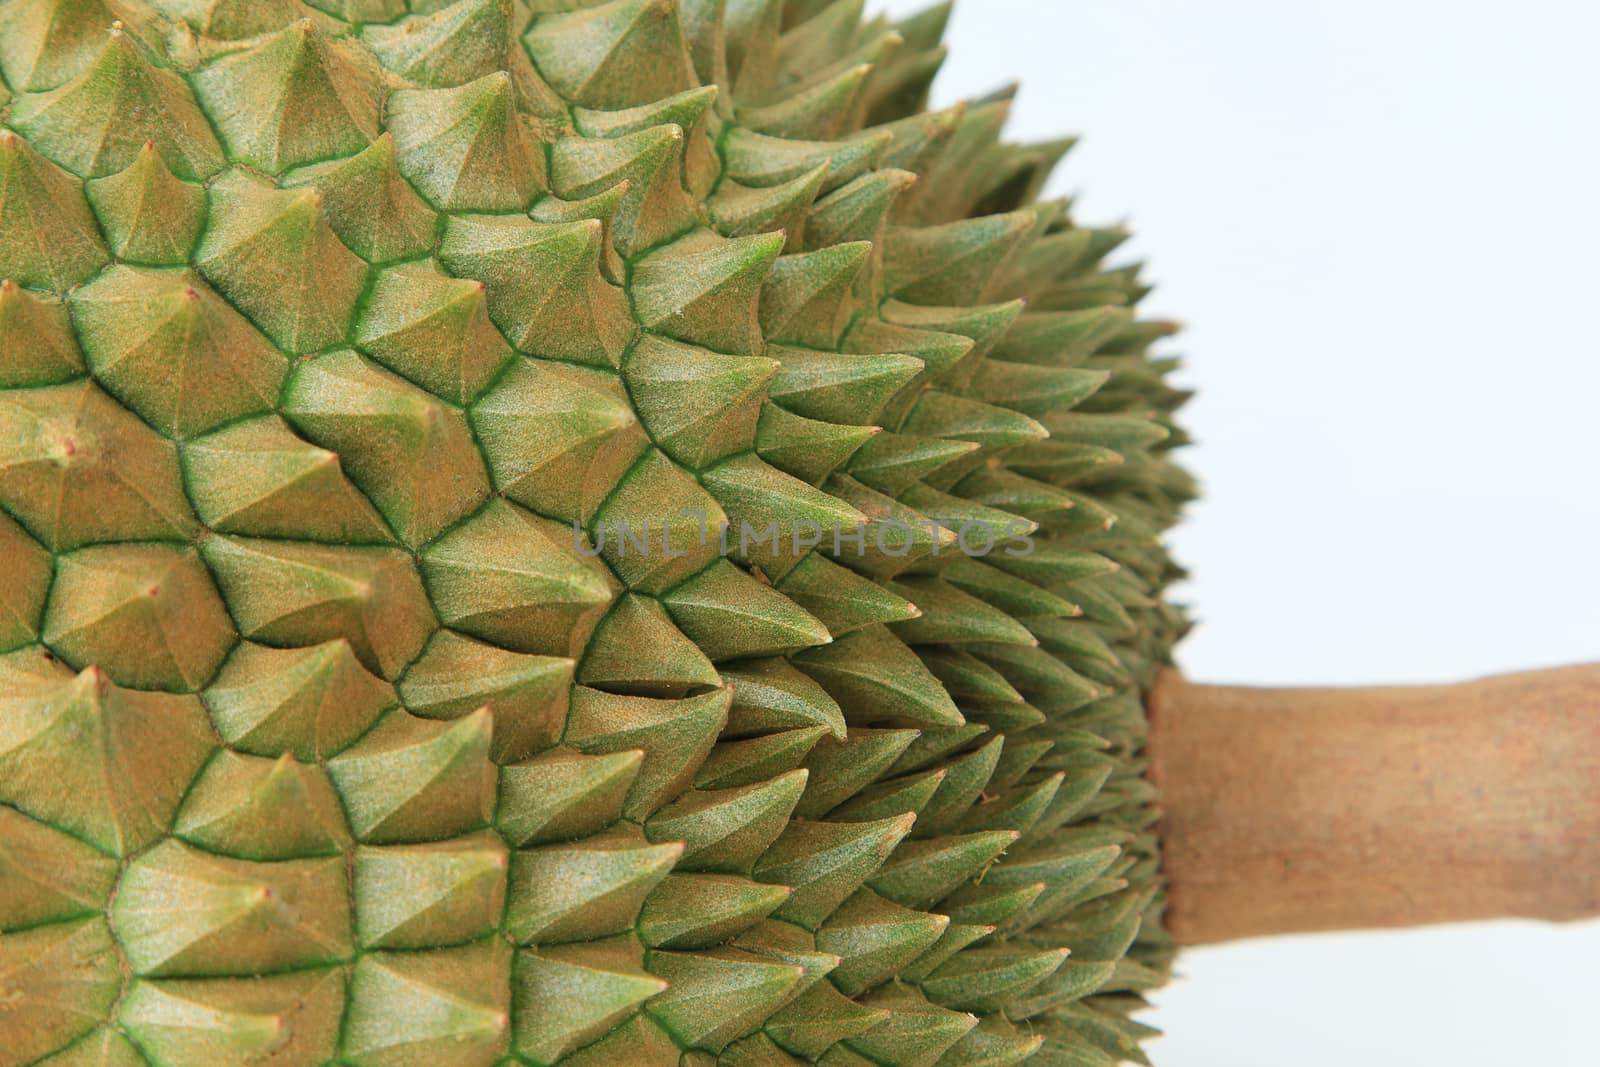 Thorns of durian fruit